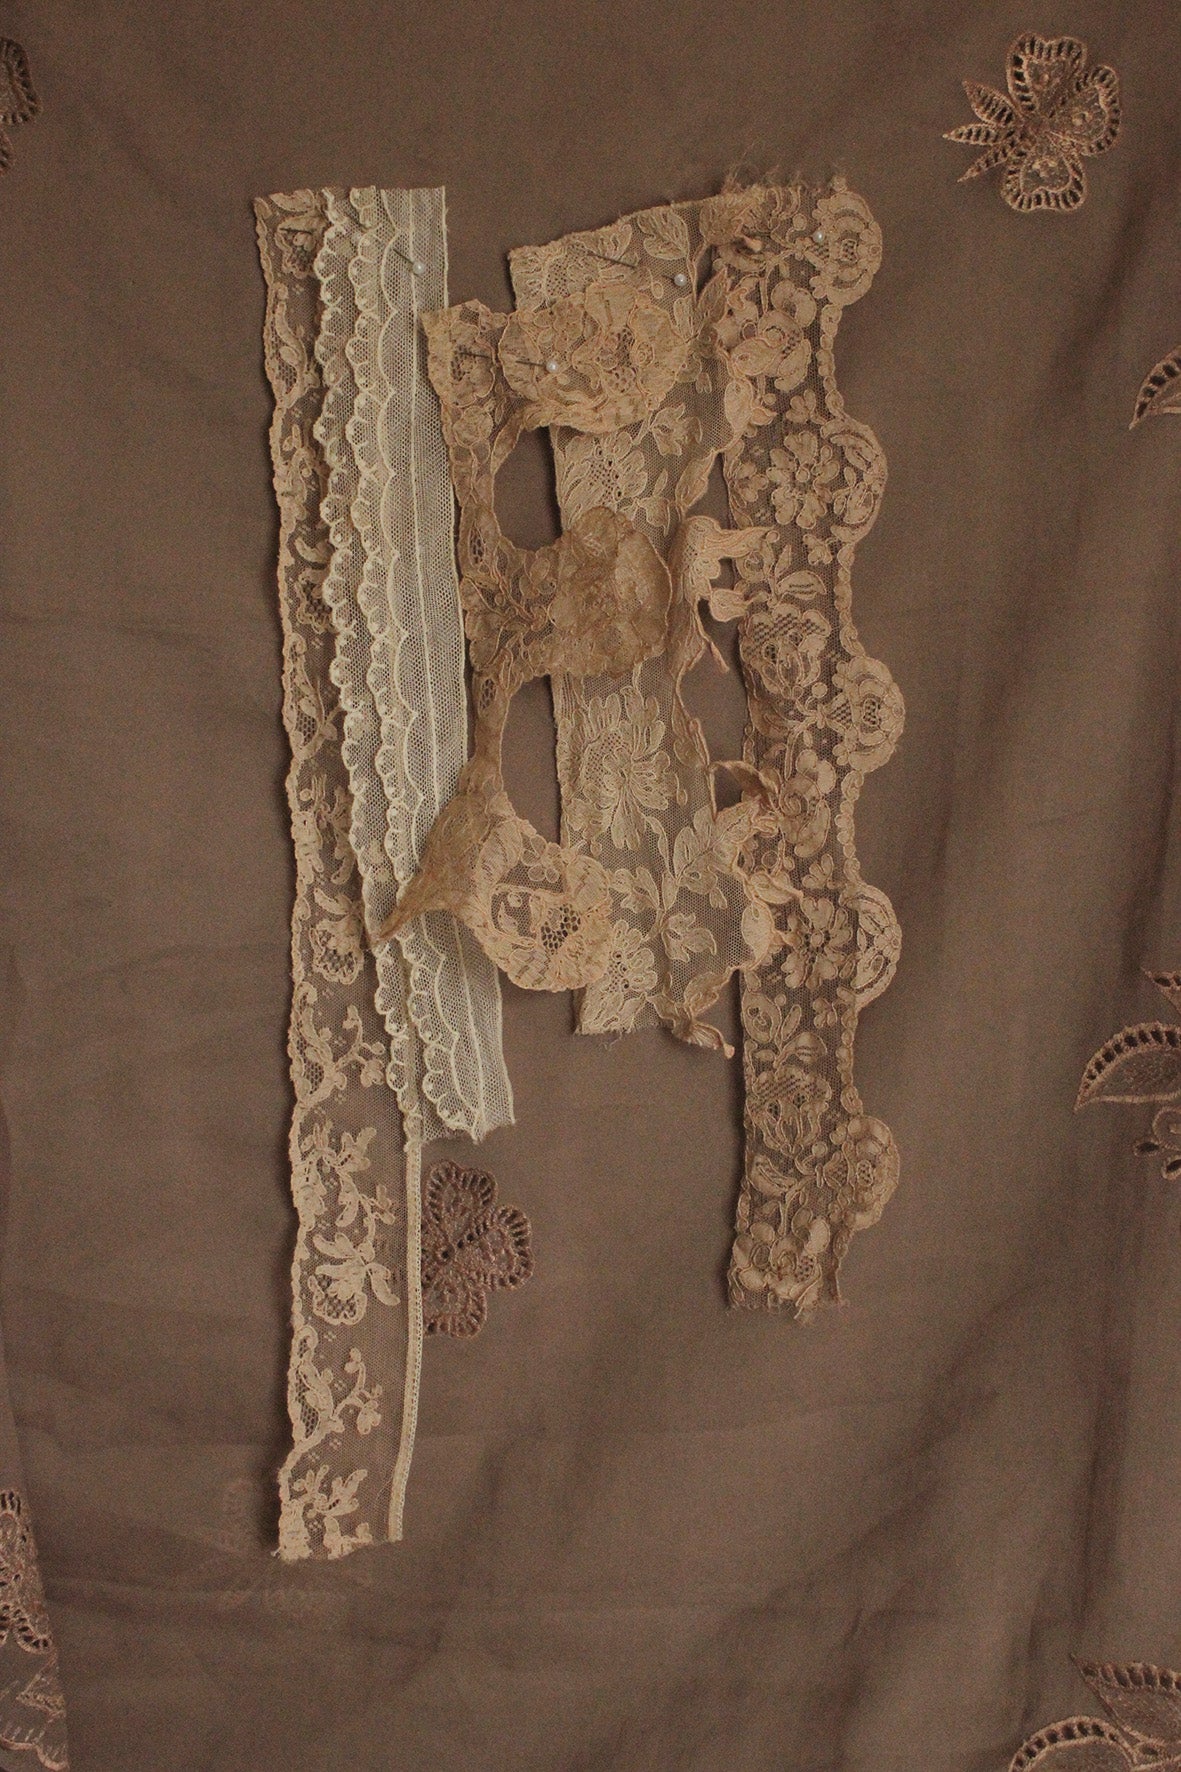 Collection of Antique Lace Borders & Panels - 5